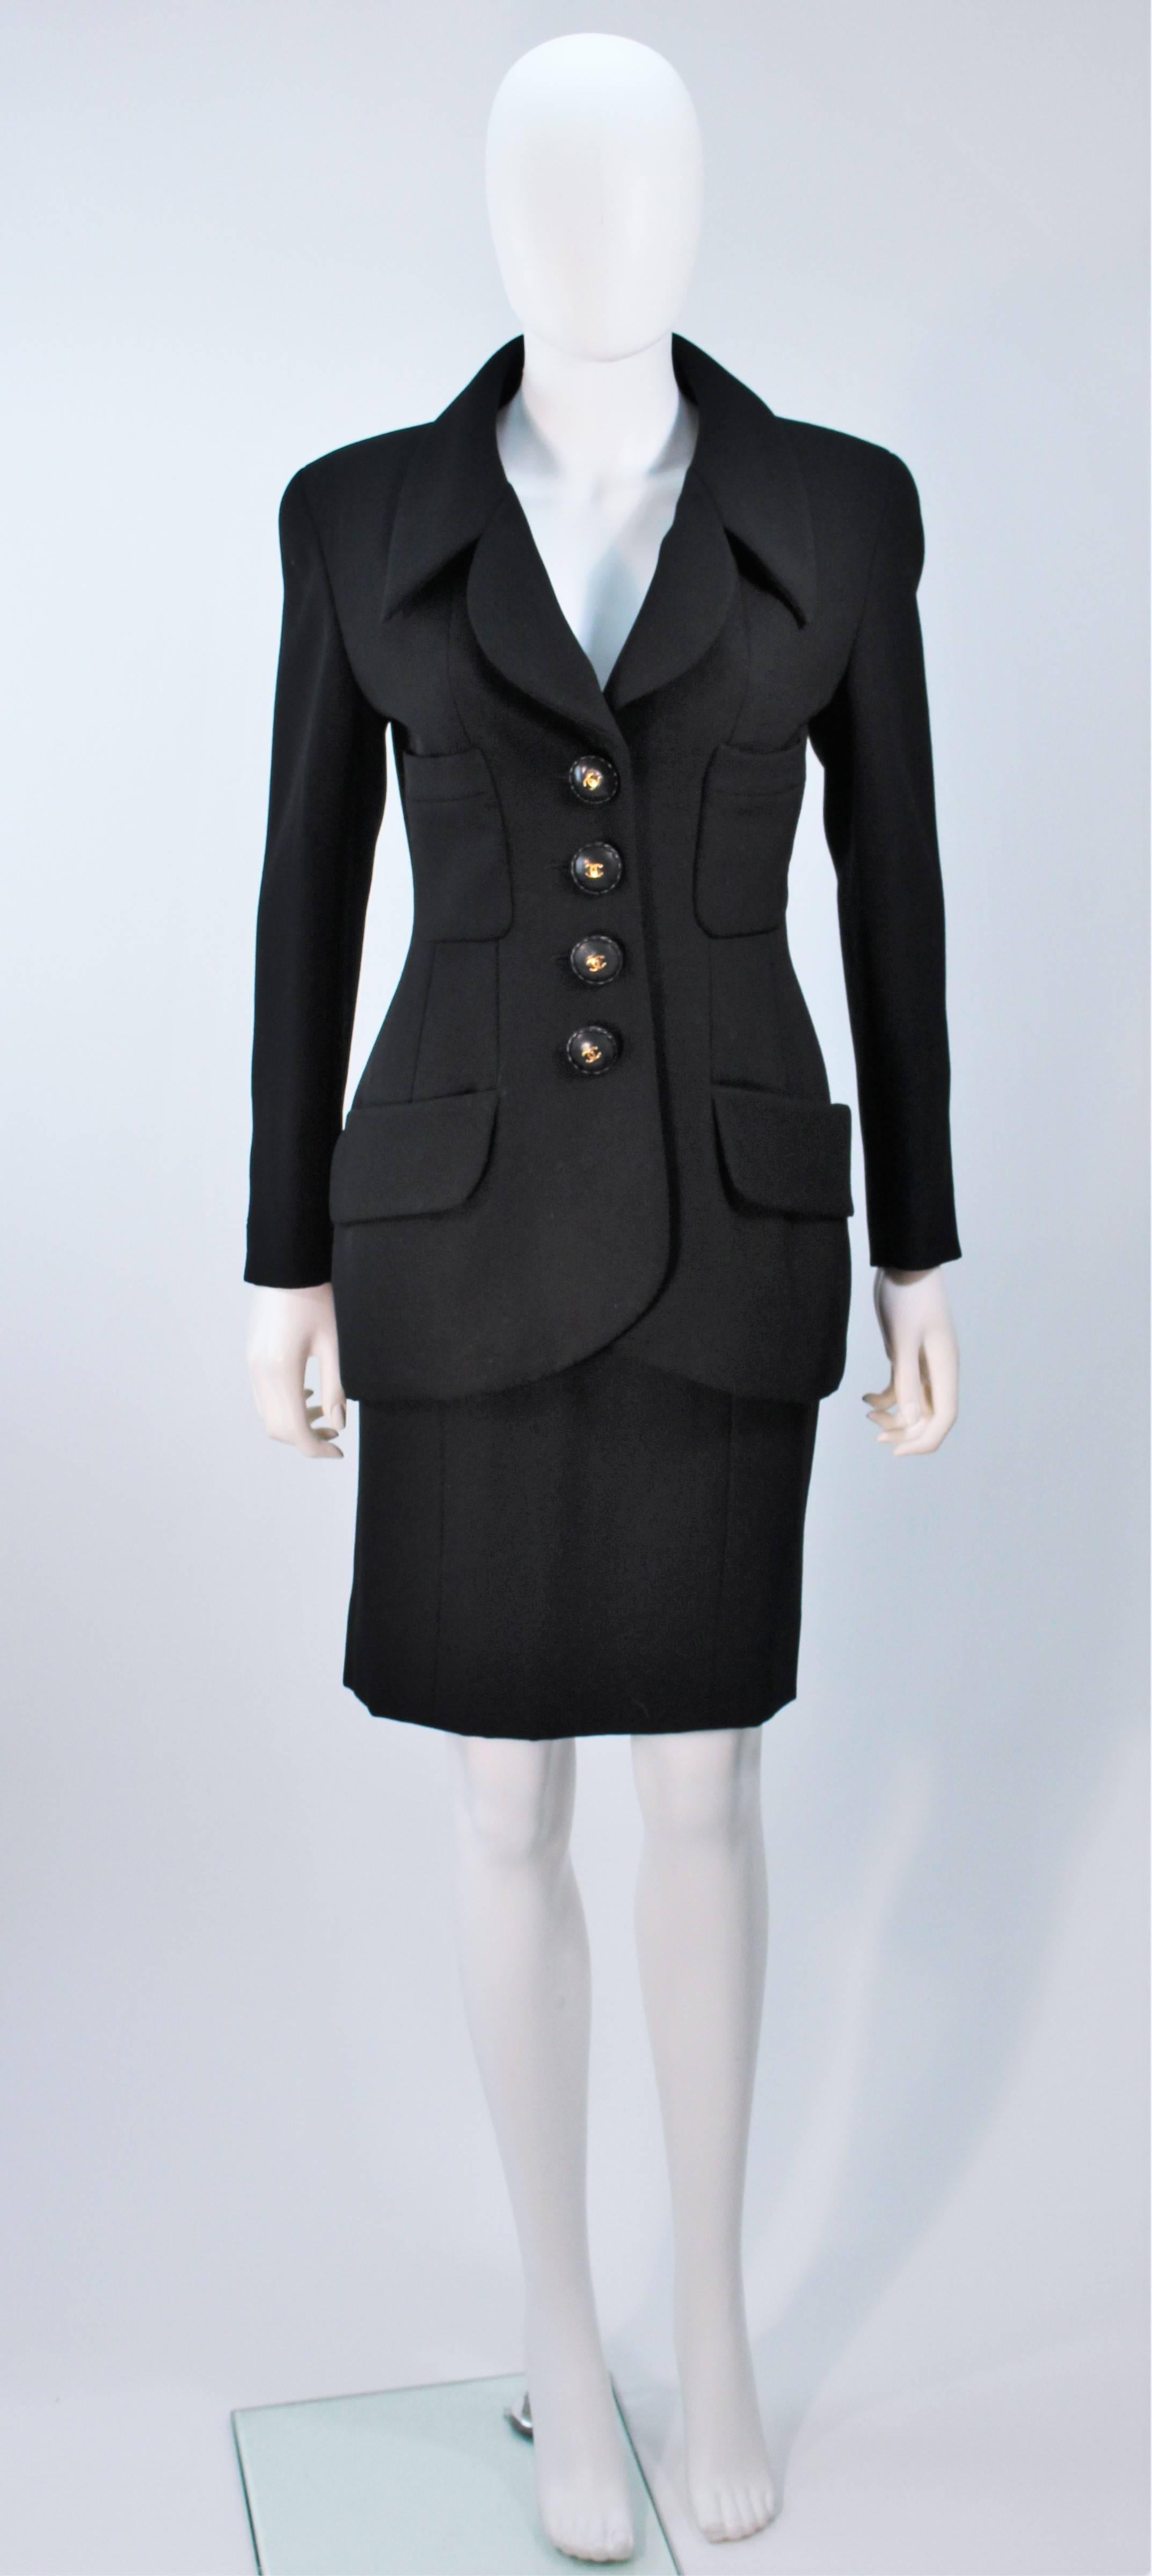  This Chanel skirt suit is composed of a black wool with wood buttons and gold 'CC' logo (silk lining). The jacket features center front button closures and a safari style. The classic pencil style skirt features a zipper closure. In excellent